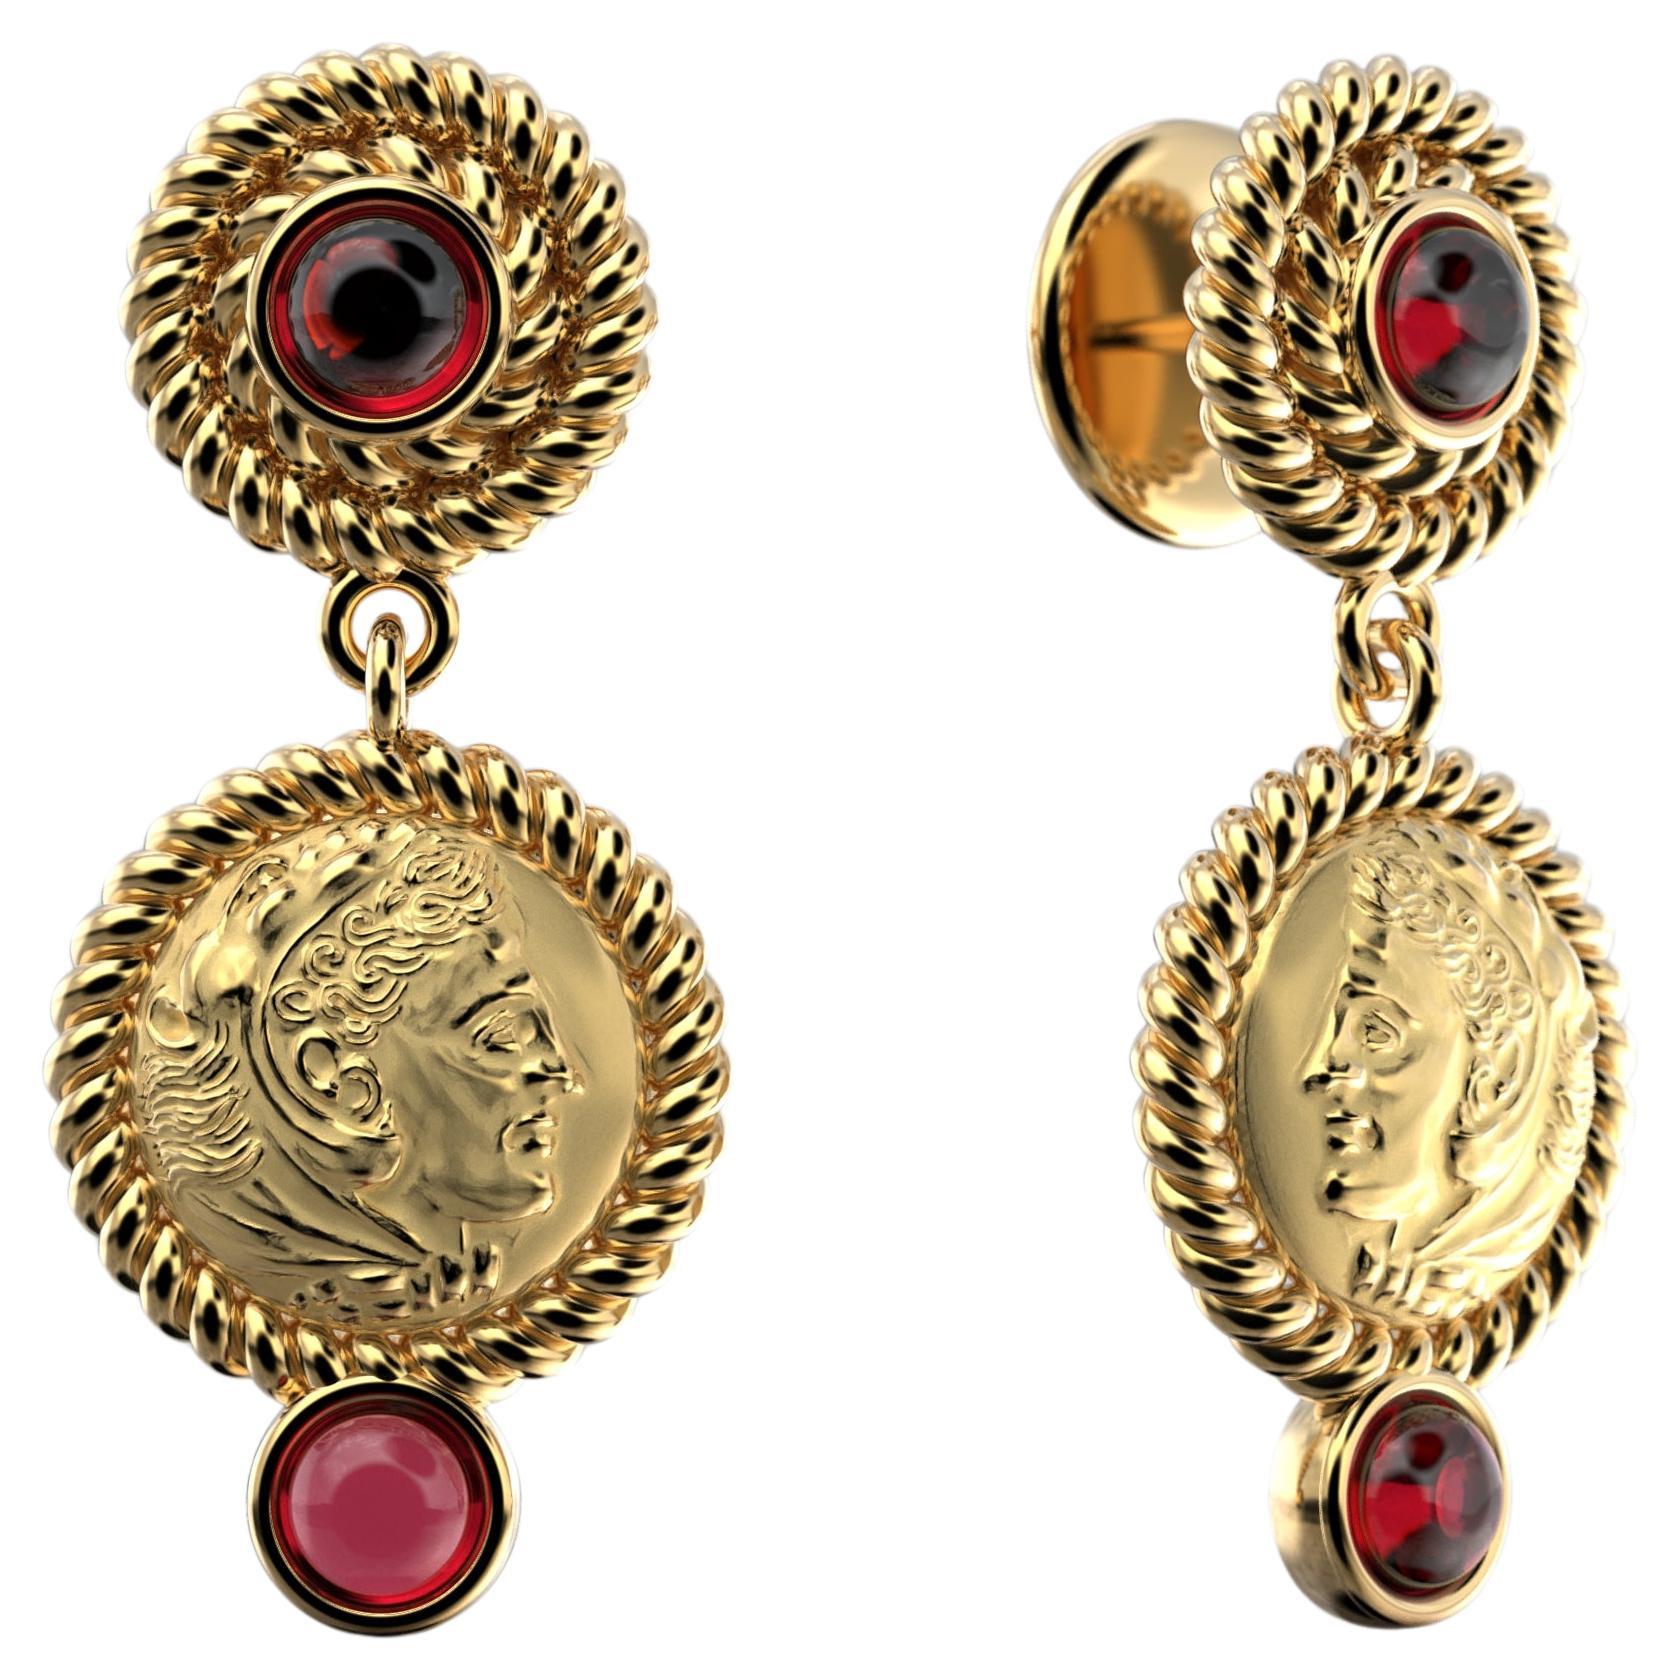 Made to order in 18k Gold and Natural Garnets. Yellow gold, rose gold or white gold.
Discover our exquisite Made in Italy Dangle Earrings, crafted with meticulous artistry in either 14k or 18k gold and adorned with stunning natural Garnet cabochons